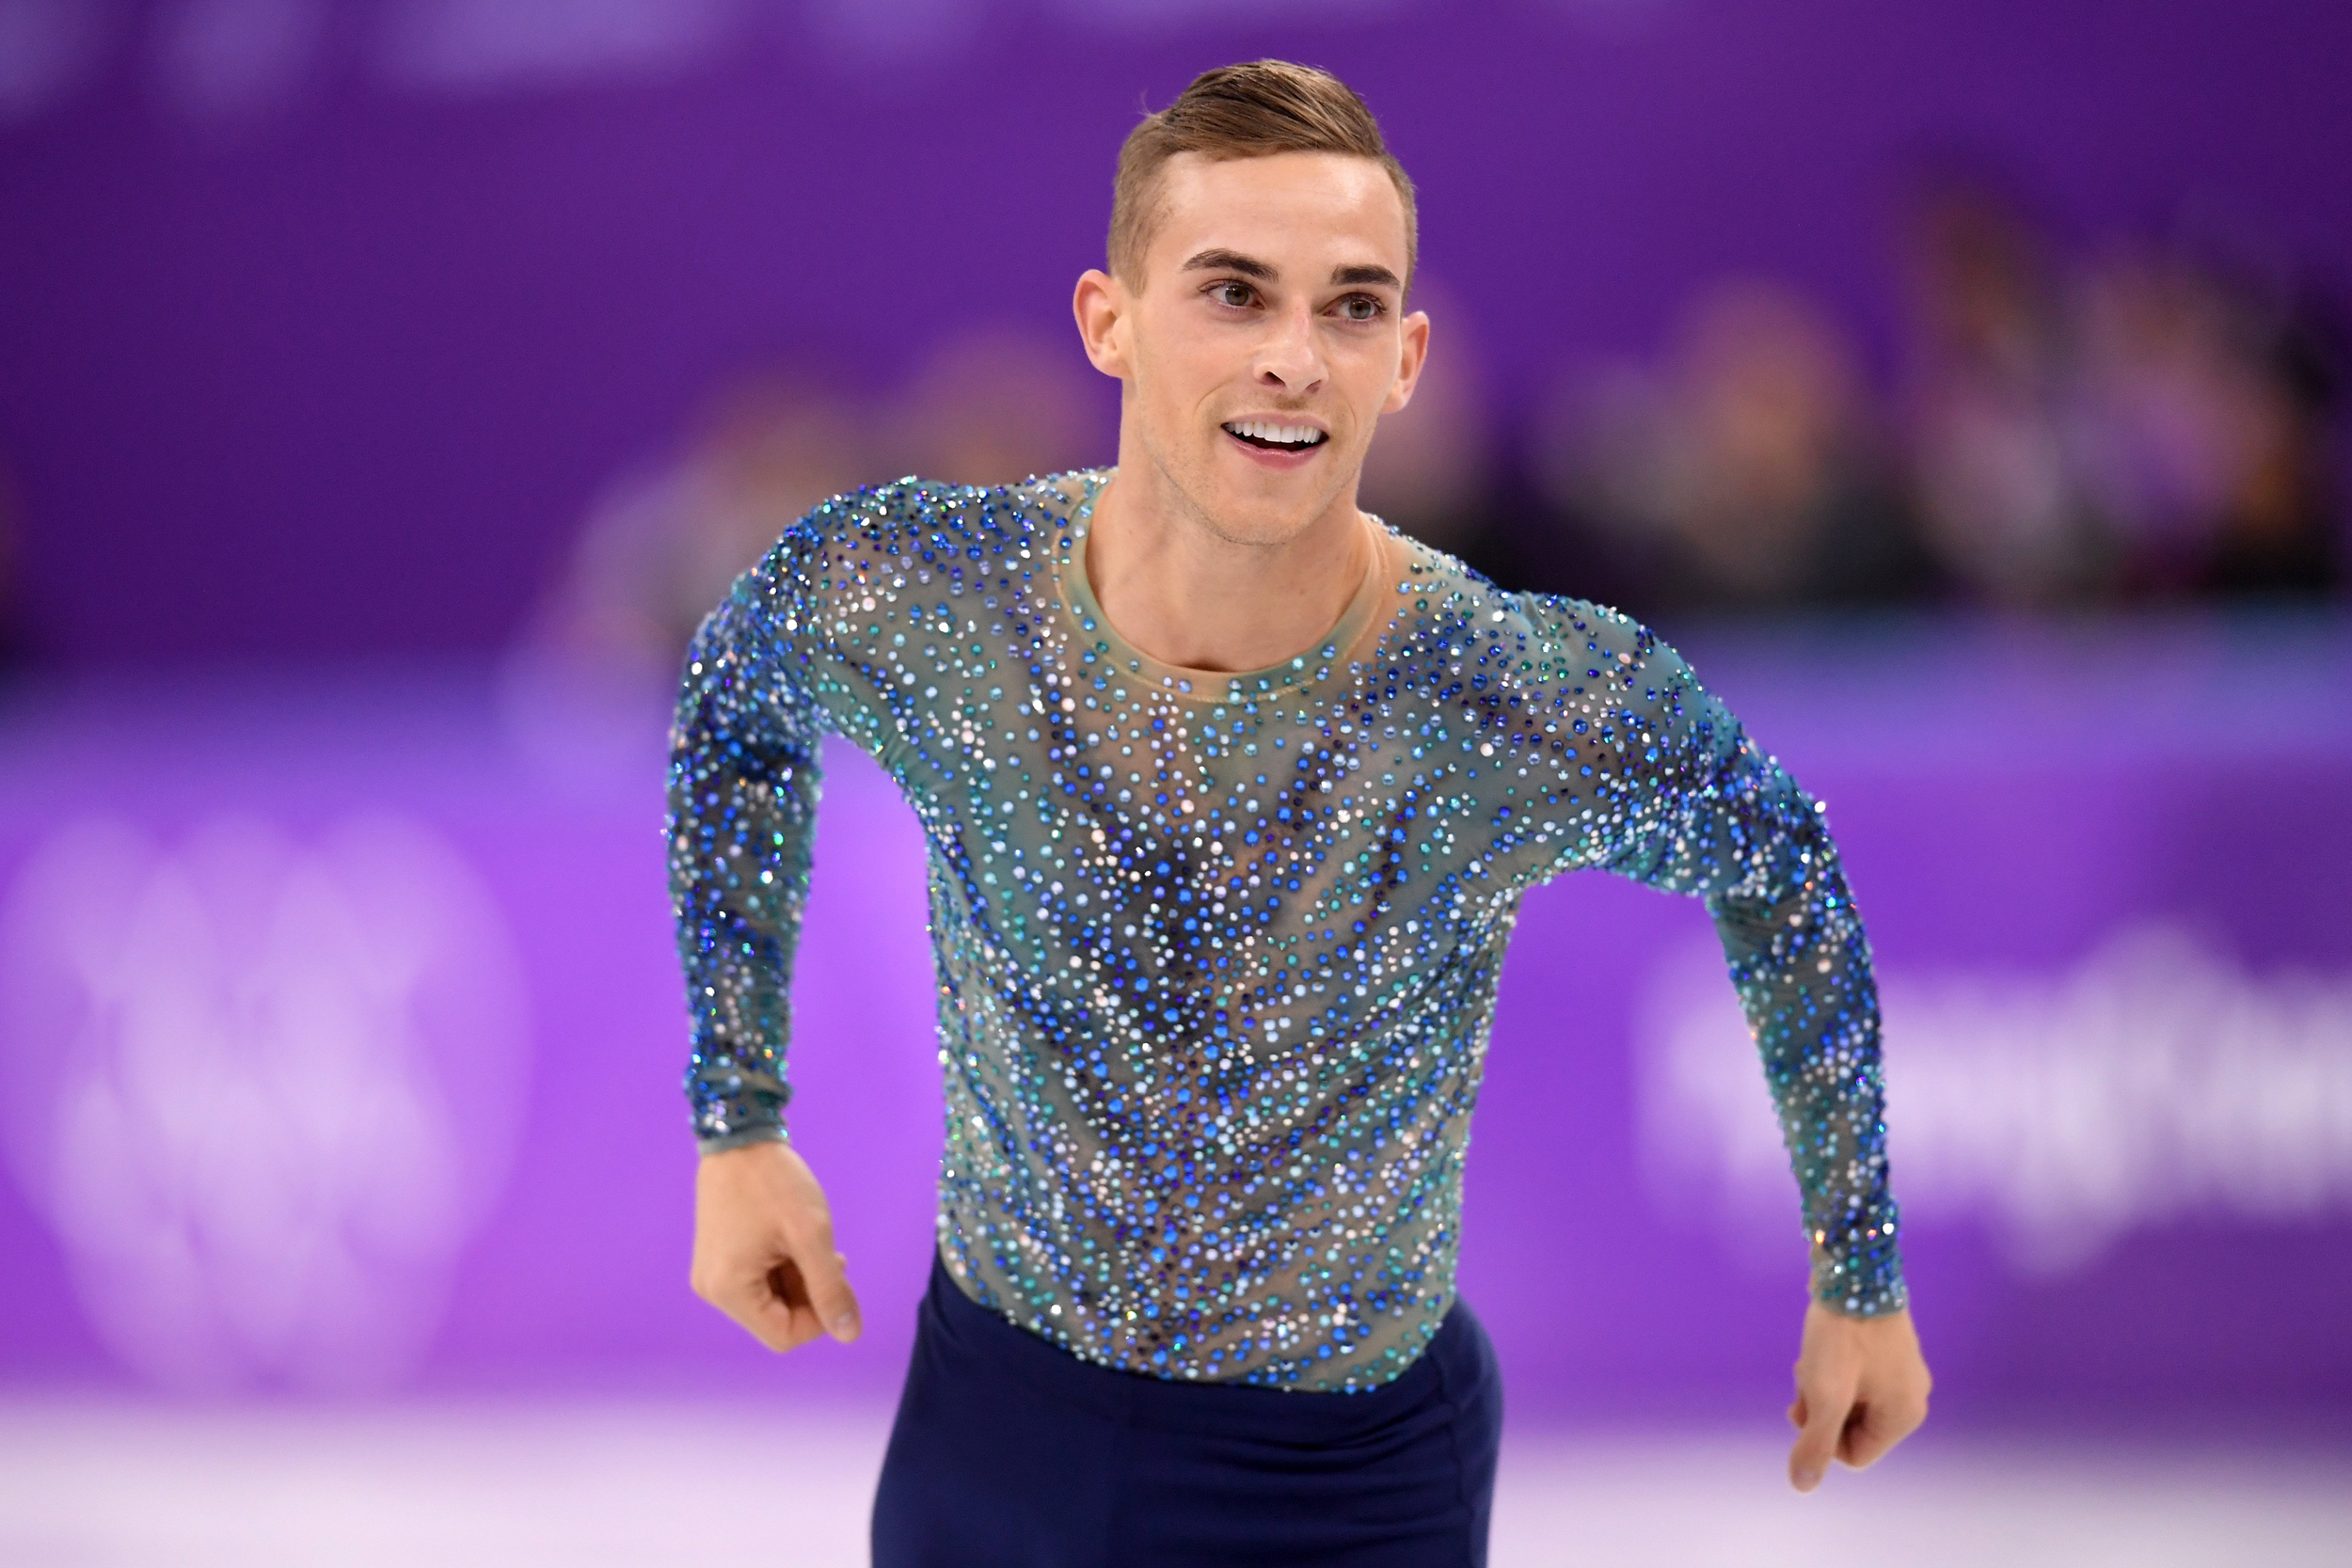 Adam Rippon wearing a sparkly blue top on an ice skating rink